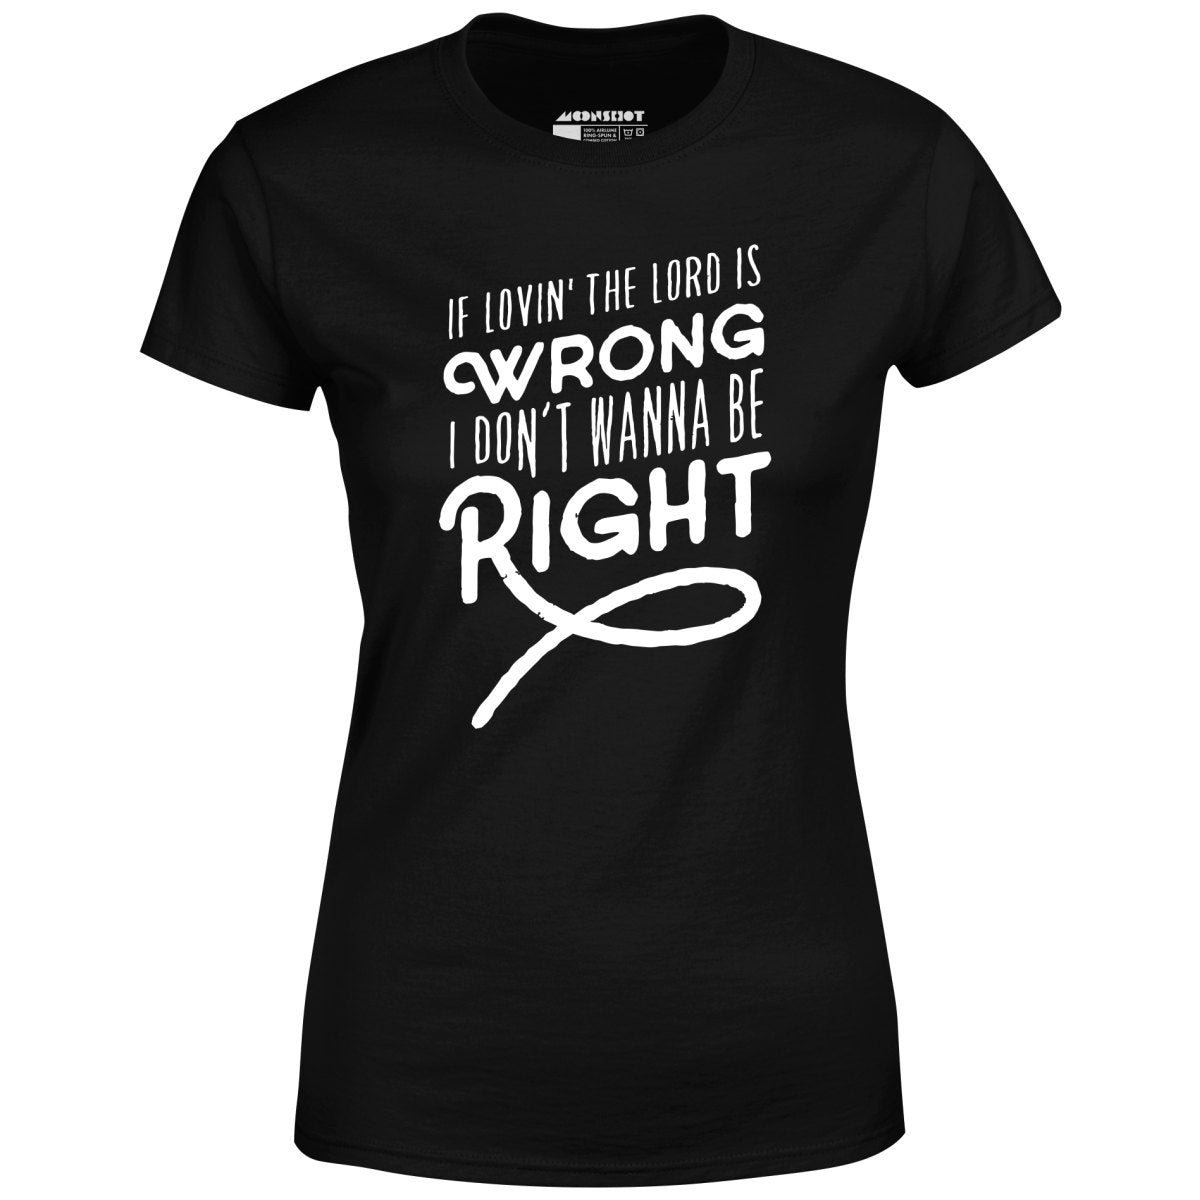 If Lovin the Lord is Wrong I Don't Wanna Be Right - Women's T-Shirt